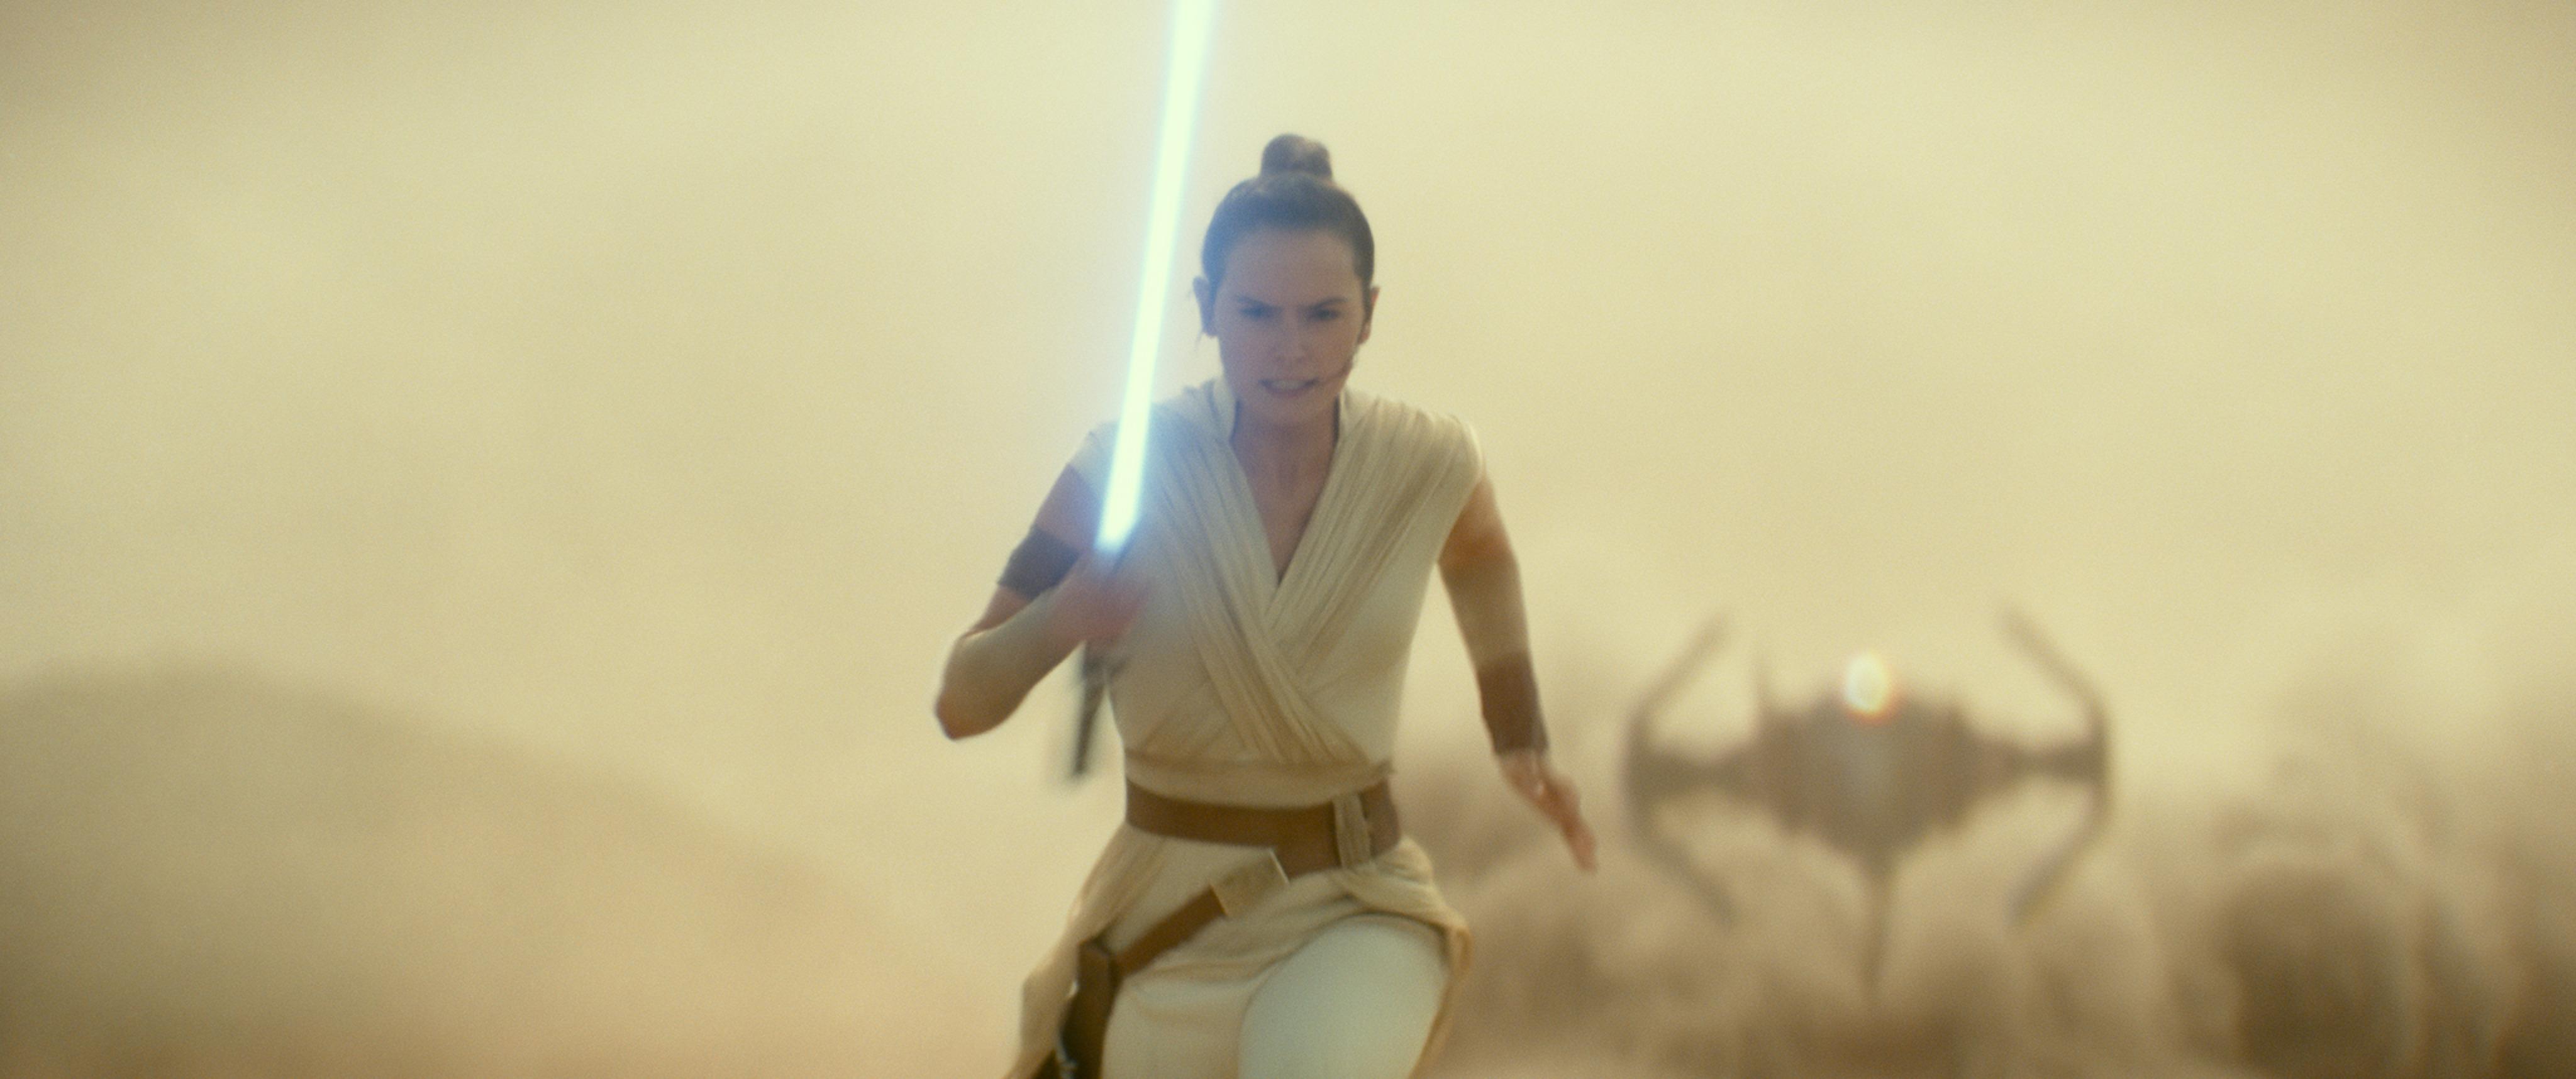 Star Wars: The Rise of Skywalker Poster and Official Image Released